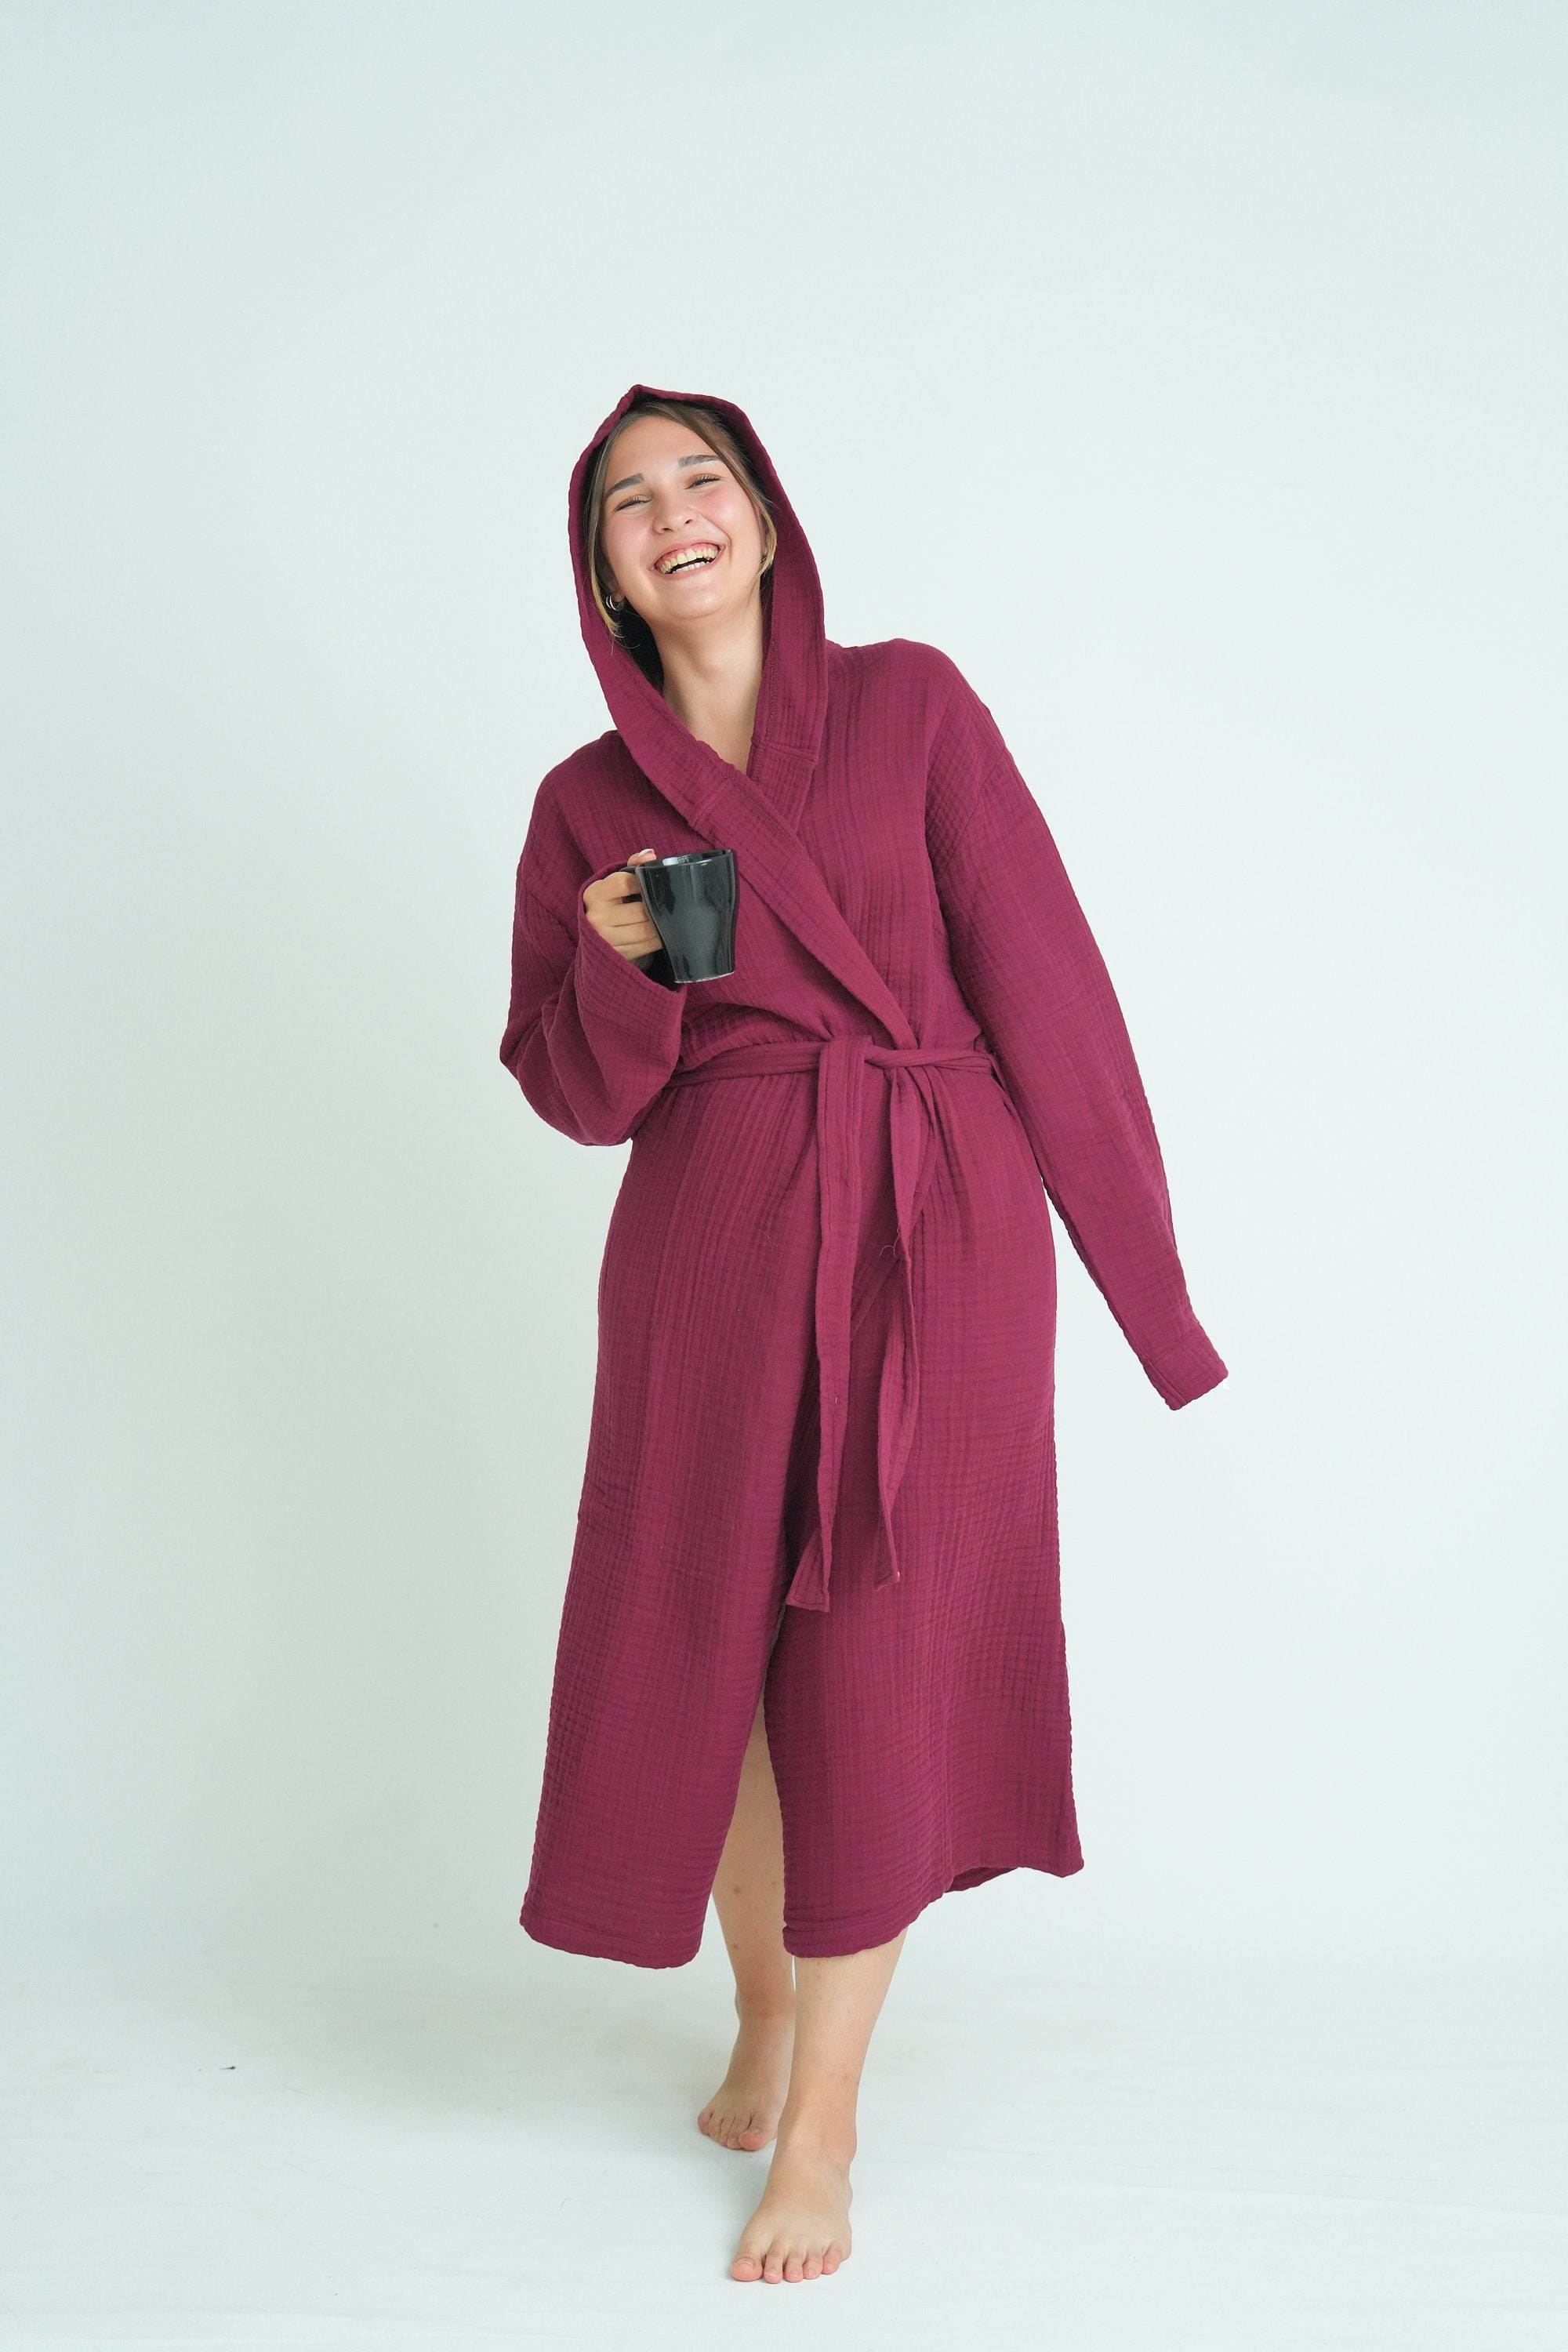 Facecloth Bathrobe Autumn and Winter Robe Couples's Long Section